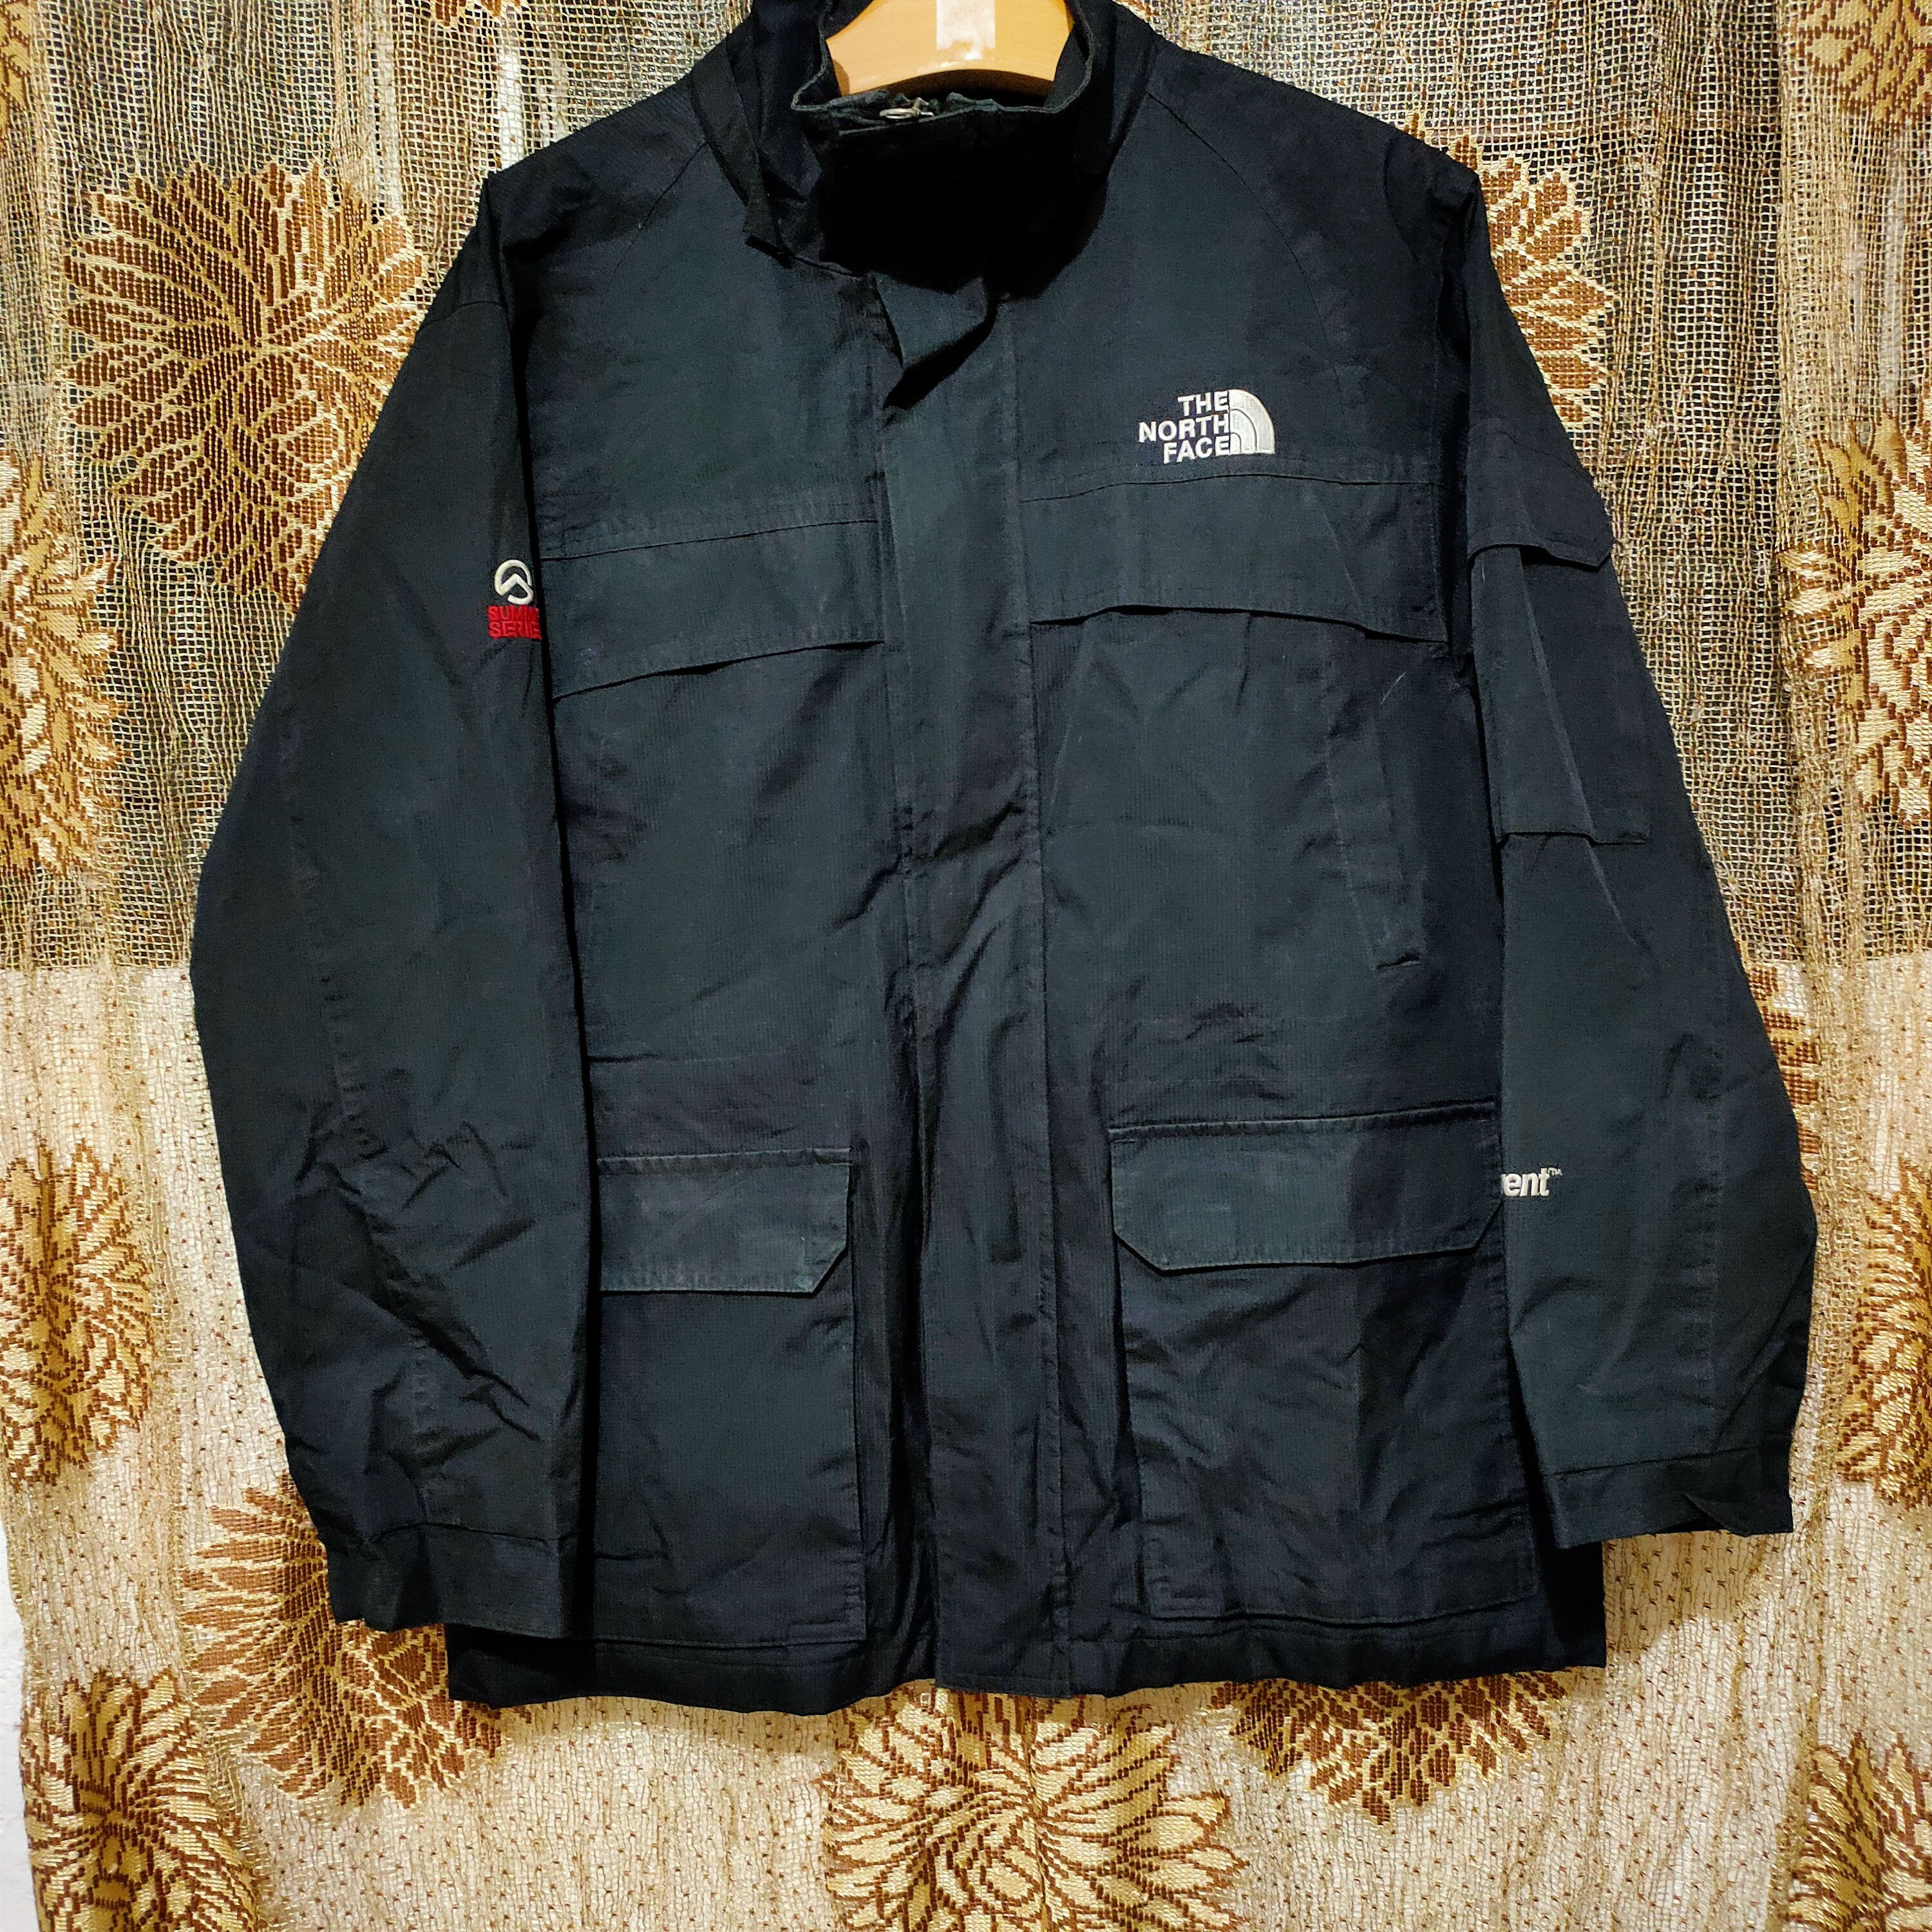 The North Face The north face jecket | Grailed